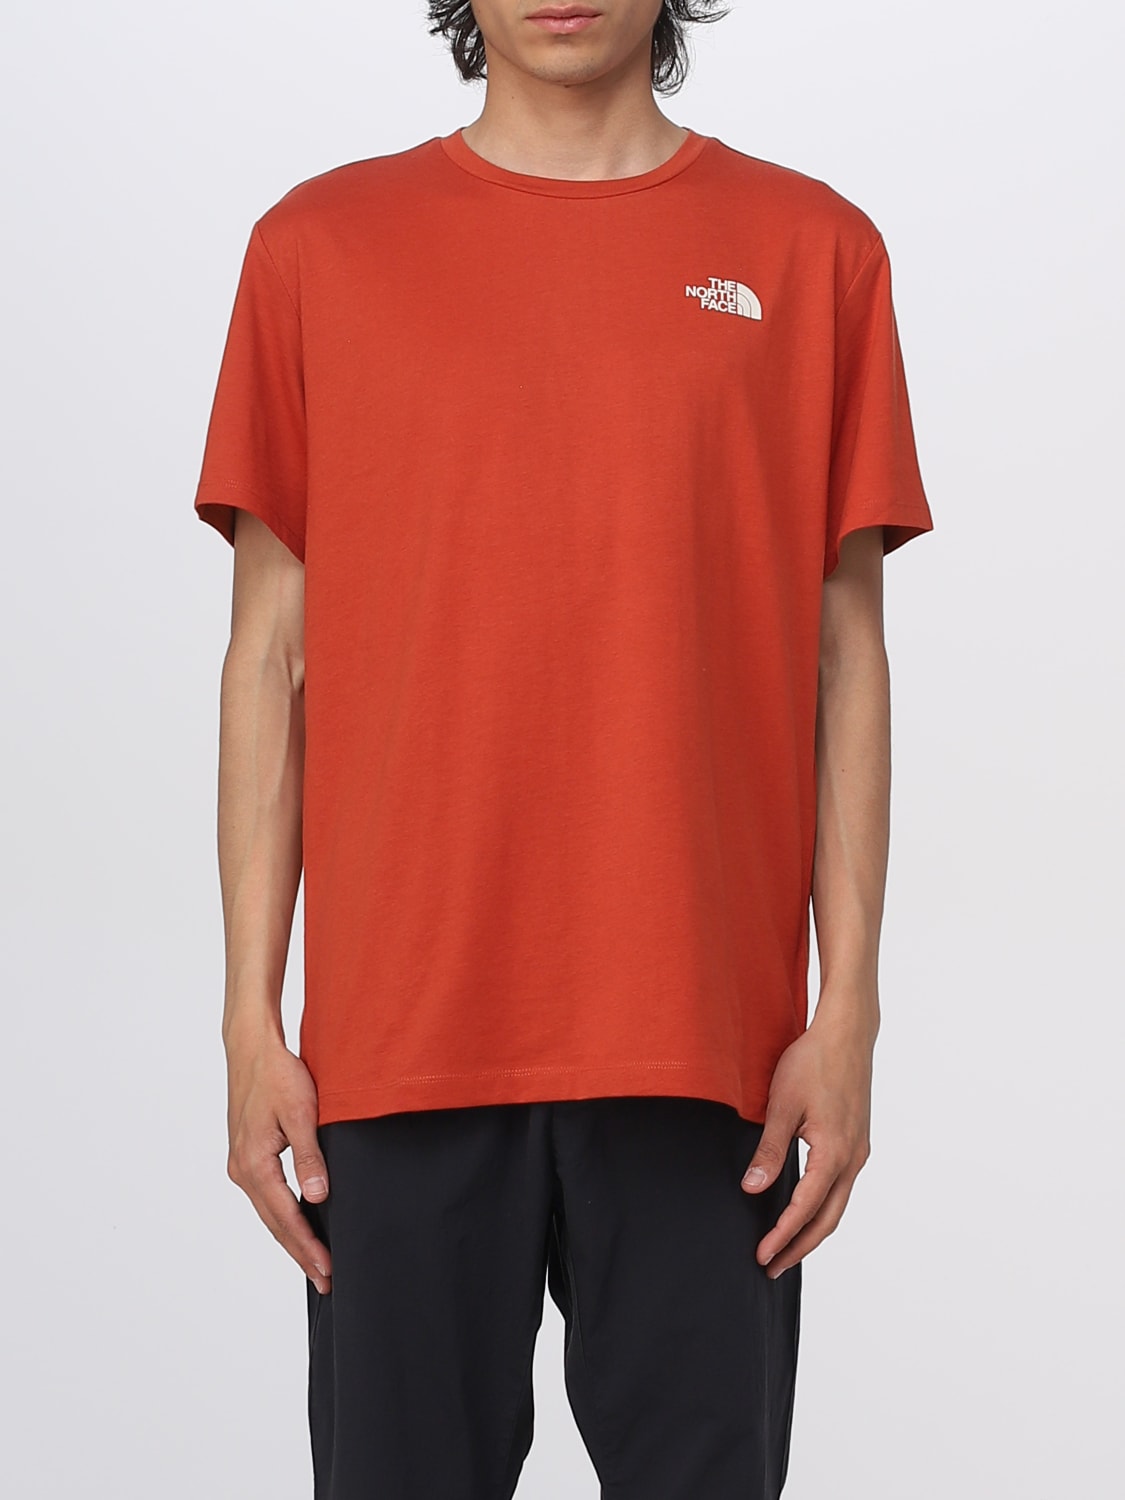 THE NORTH FACE：Tシャツ メンズ オレンジ North Face Tシャツ  NF0A55EF